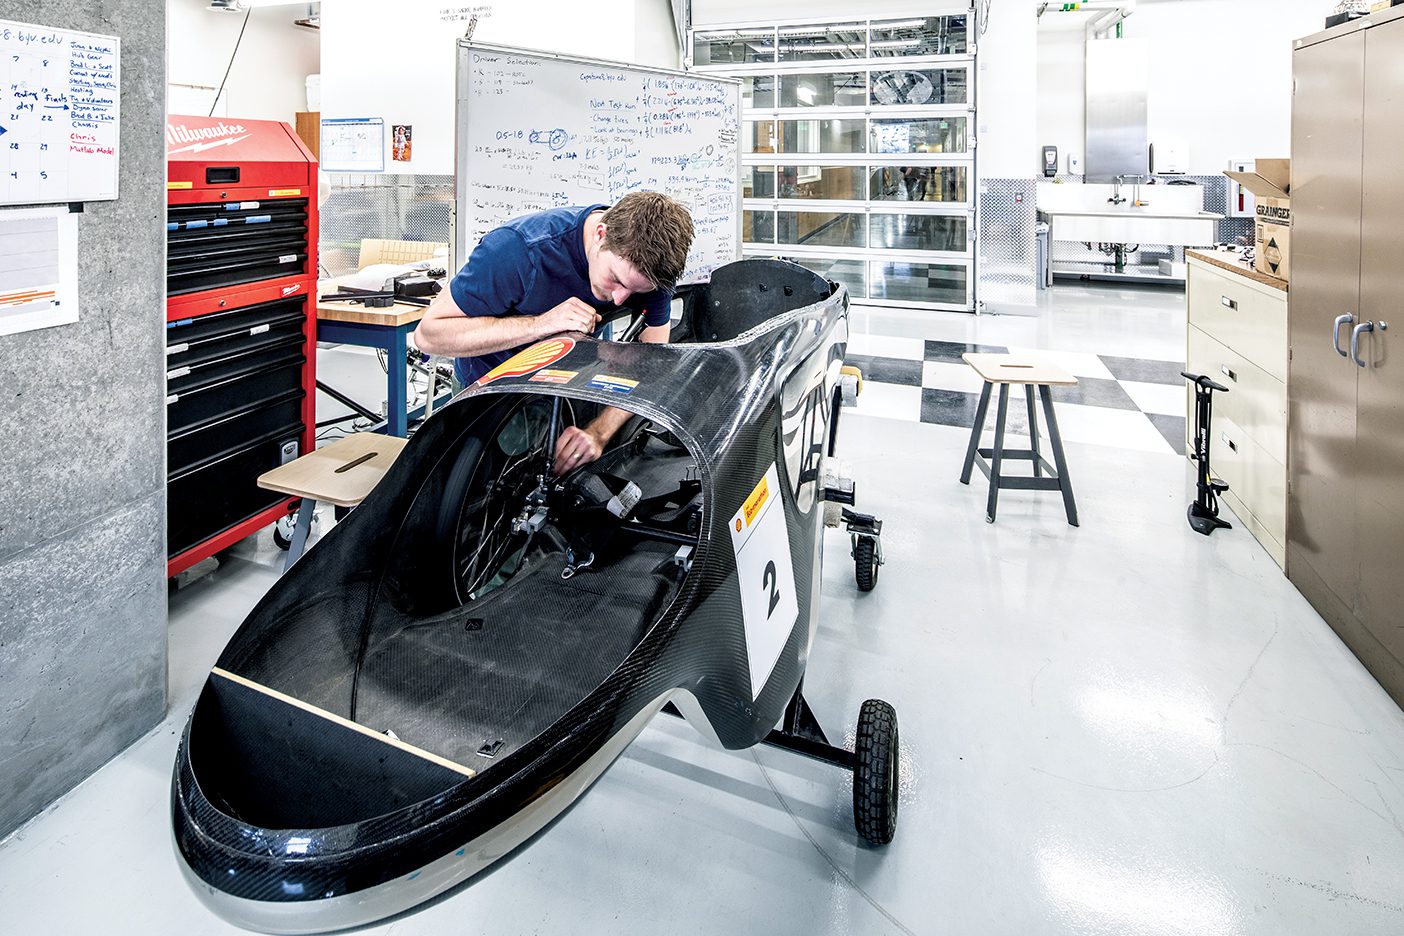 A student works on a supermileage vehicle in BYU's new Engineering Building.